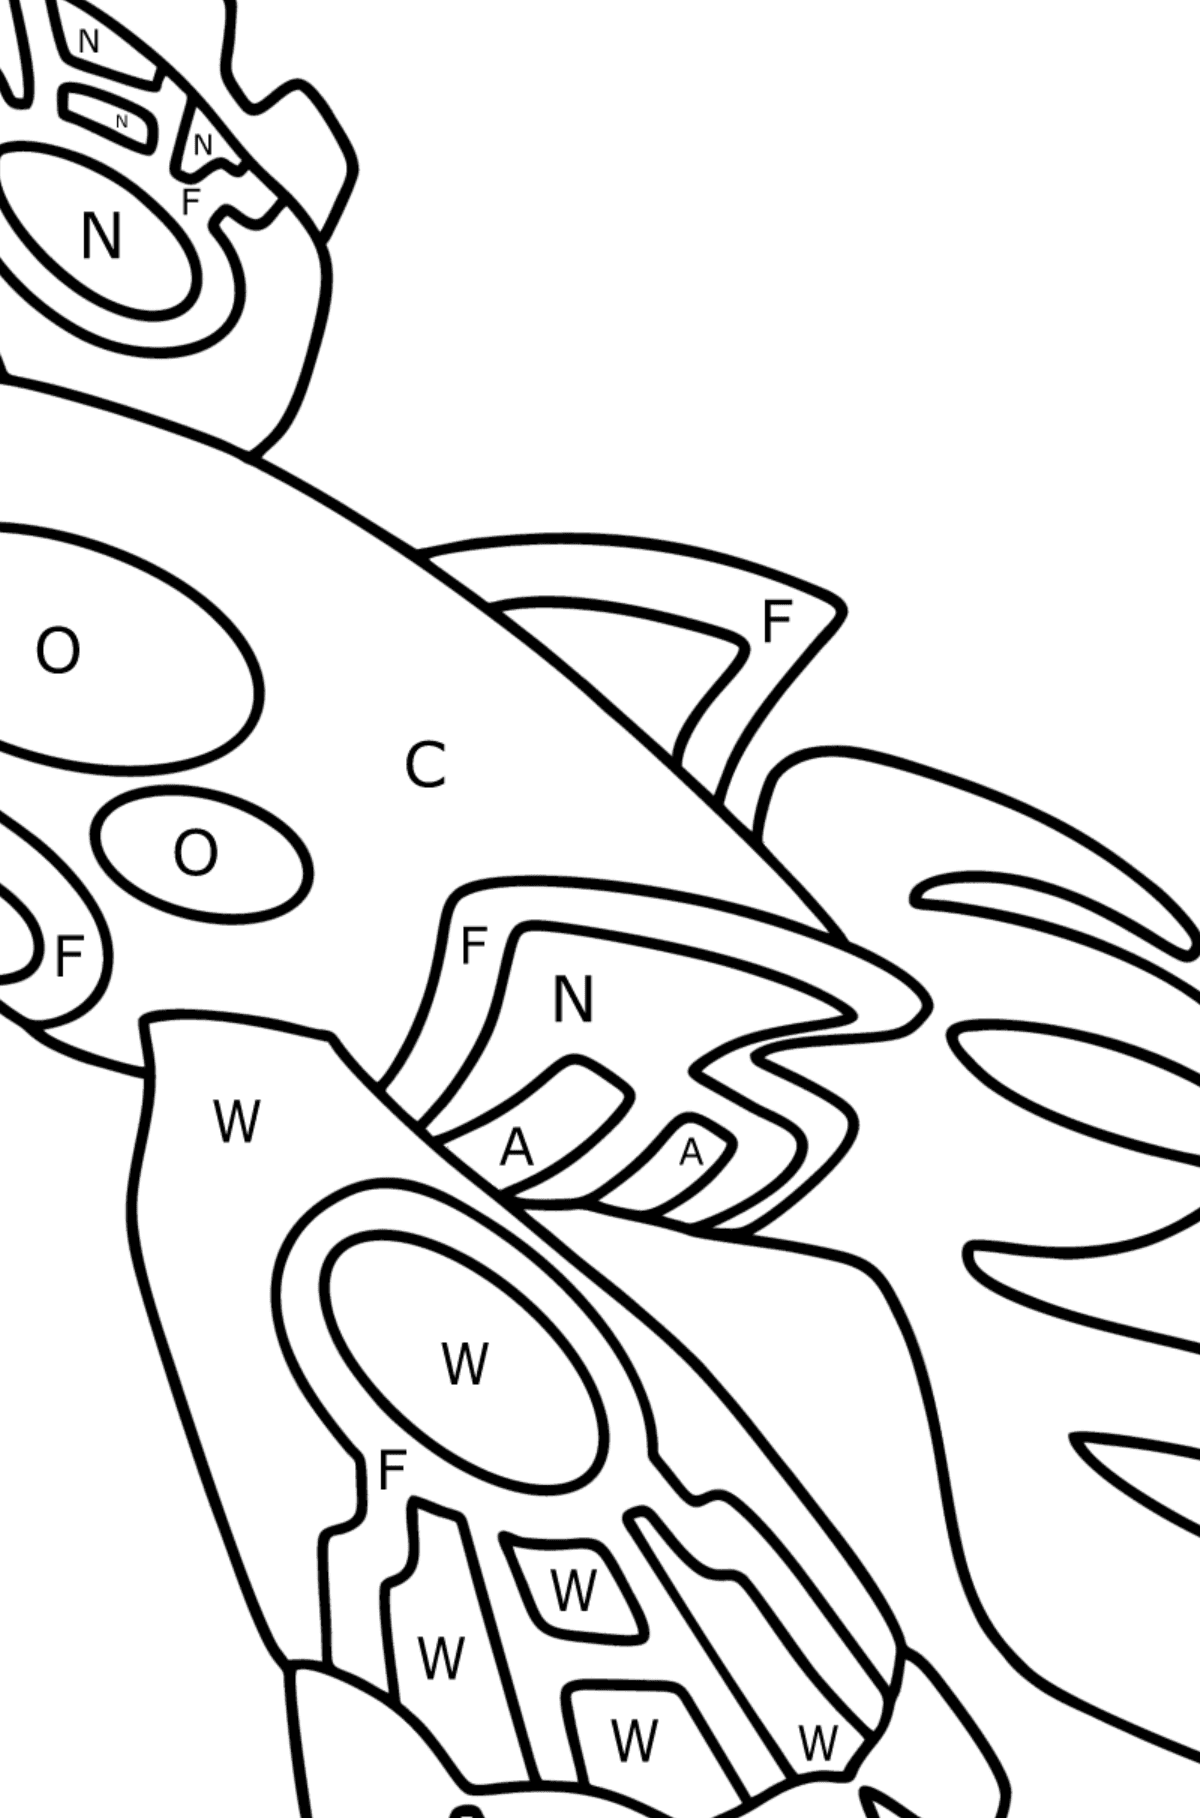 Coloring page Pokemon Go Kyogre - Coloring by Letters for Kids